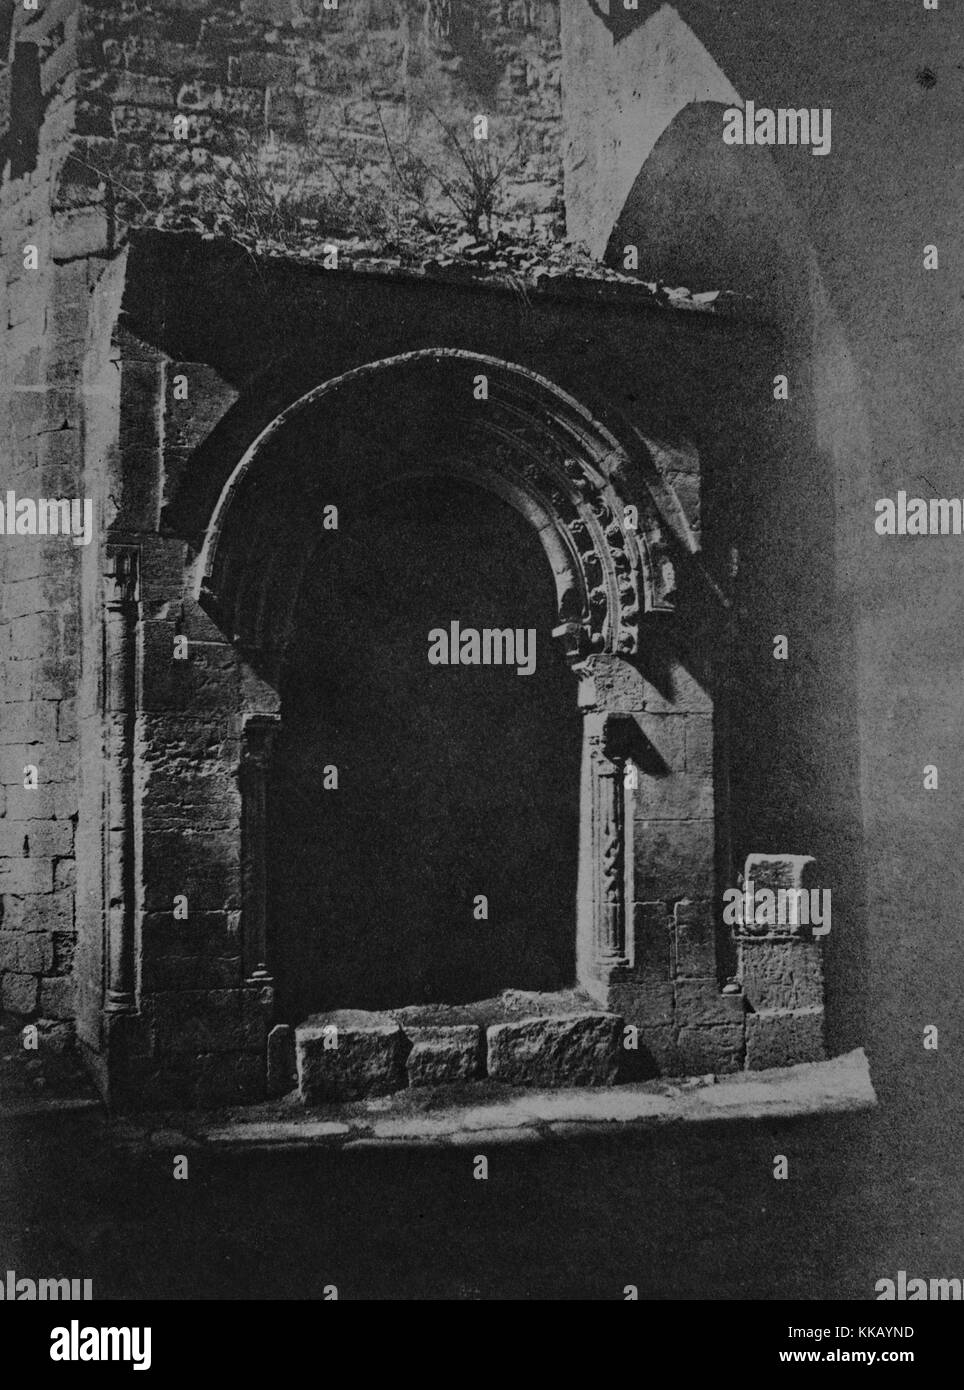 A photograph of an Arab fountain, the fountain was constructed to provide drinking water to Arabs making pilgrimages to holy sites in the city, the fountain itself is contained within a stone work archway and structure that have been constructed on the exterior of a building, Jerusalem, 1856. From the New York Public Library. Stock Photo